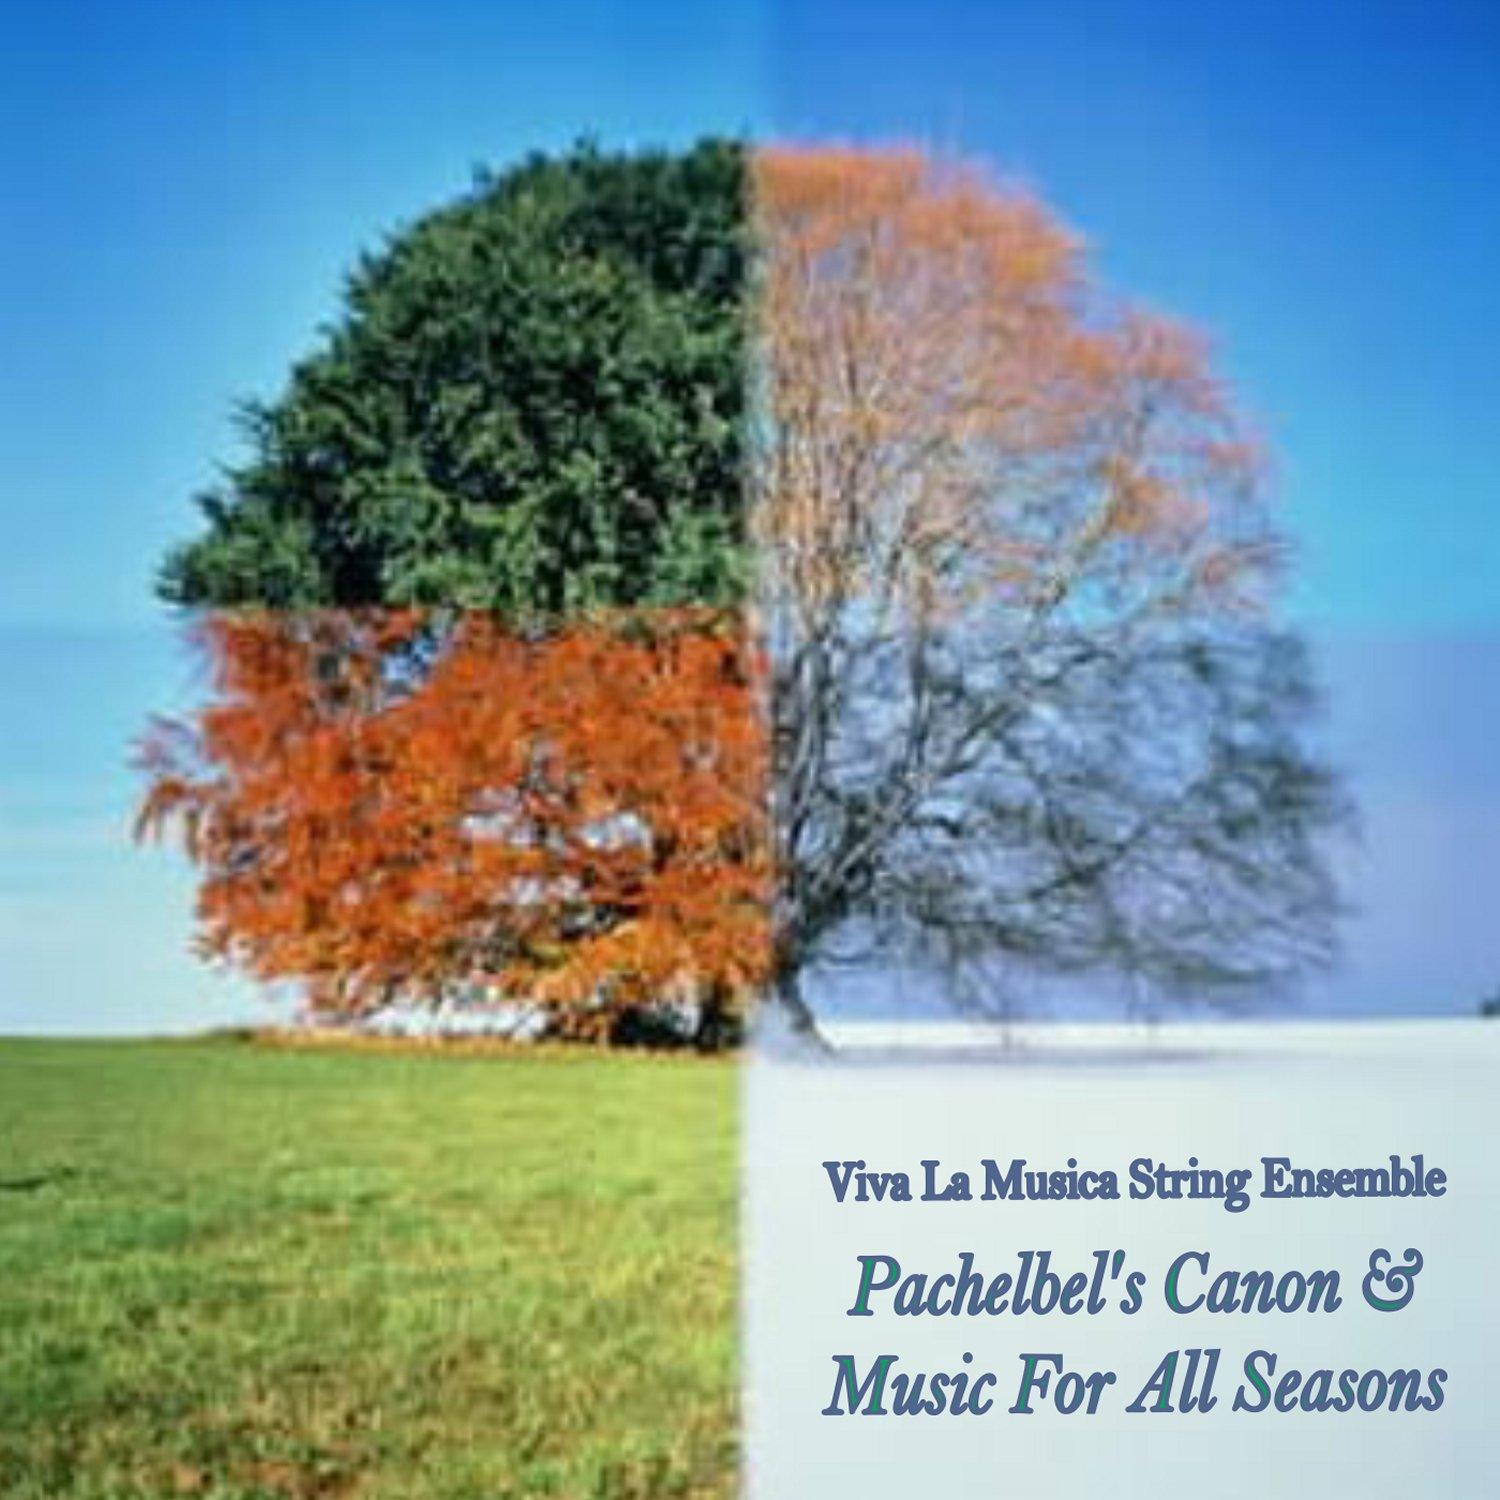 Pachelbel's Canon & Music for All Seasons